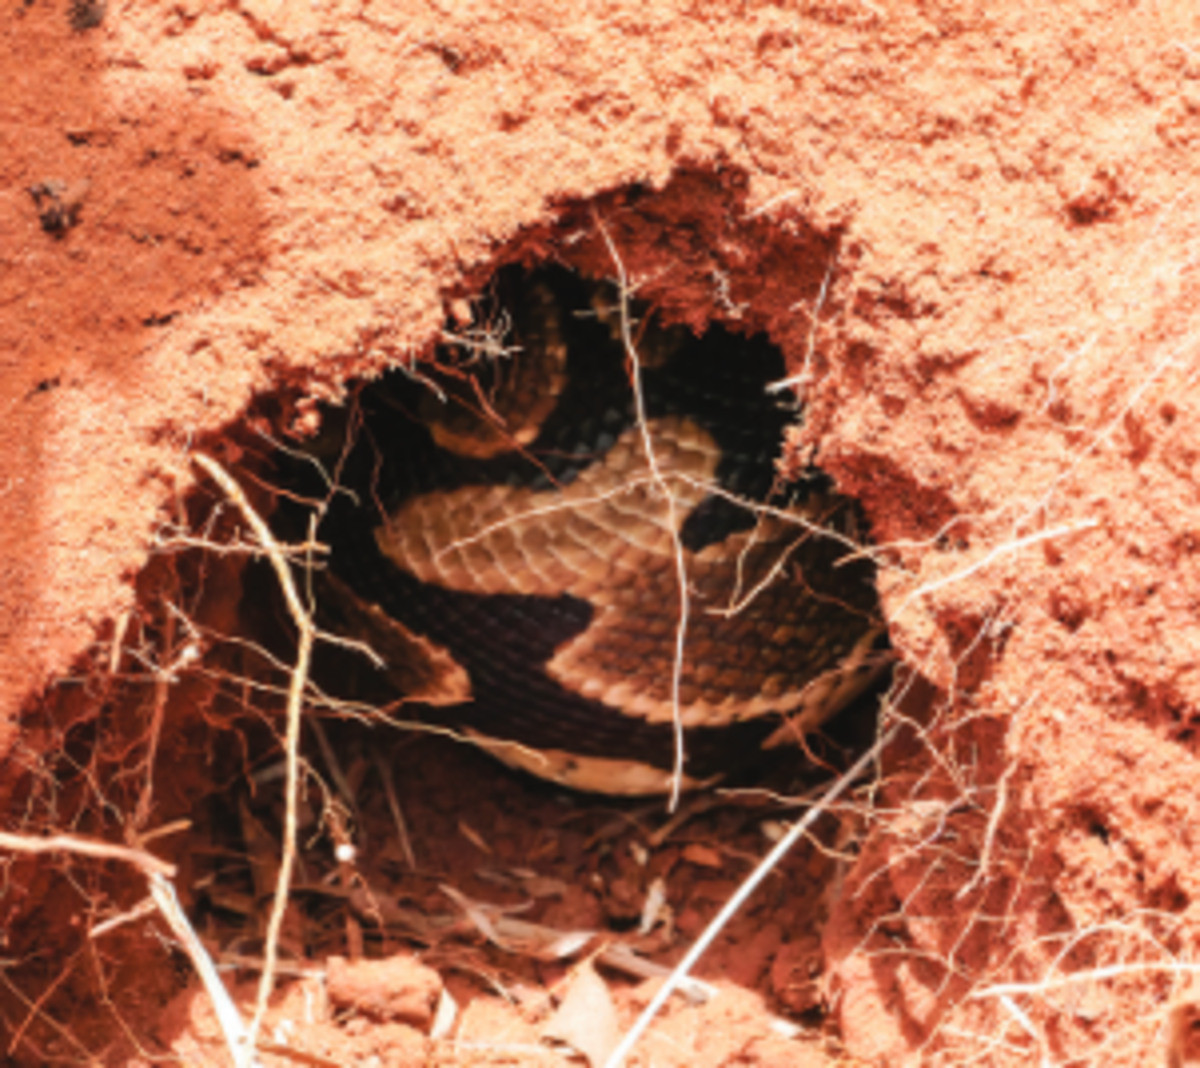 Ball python in a rodent burrow. 